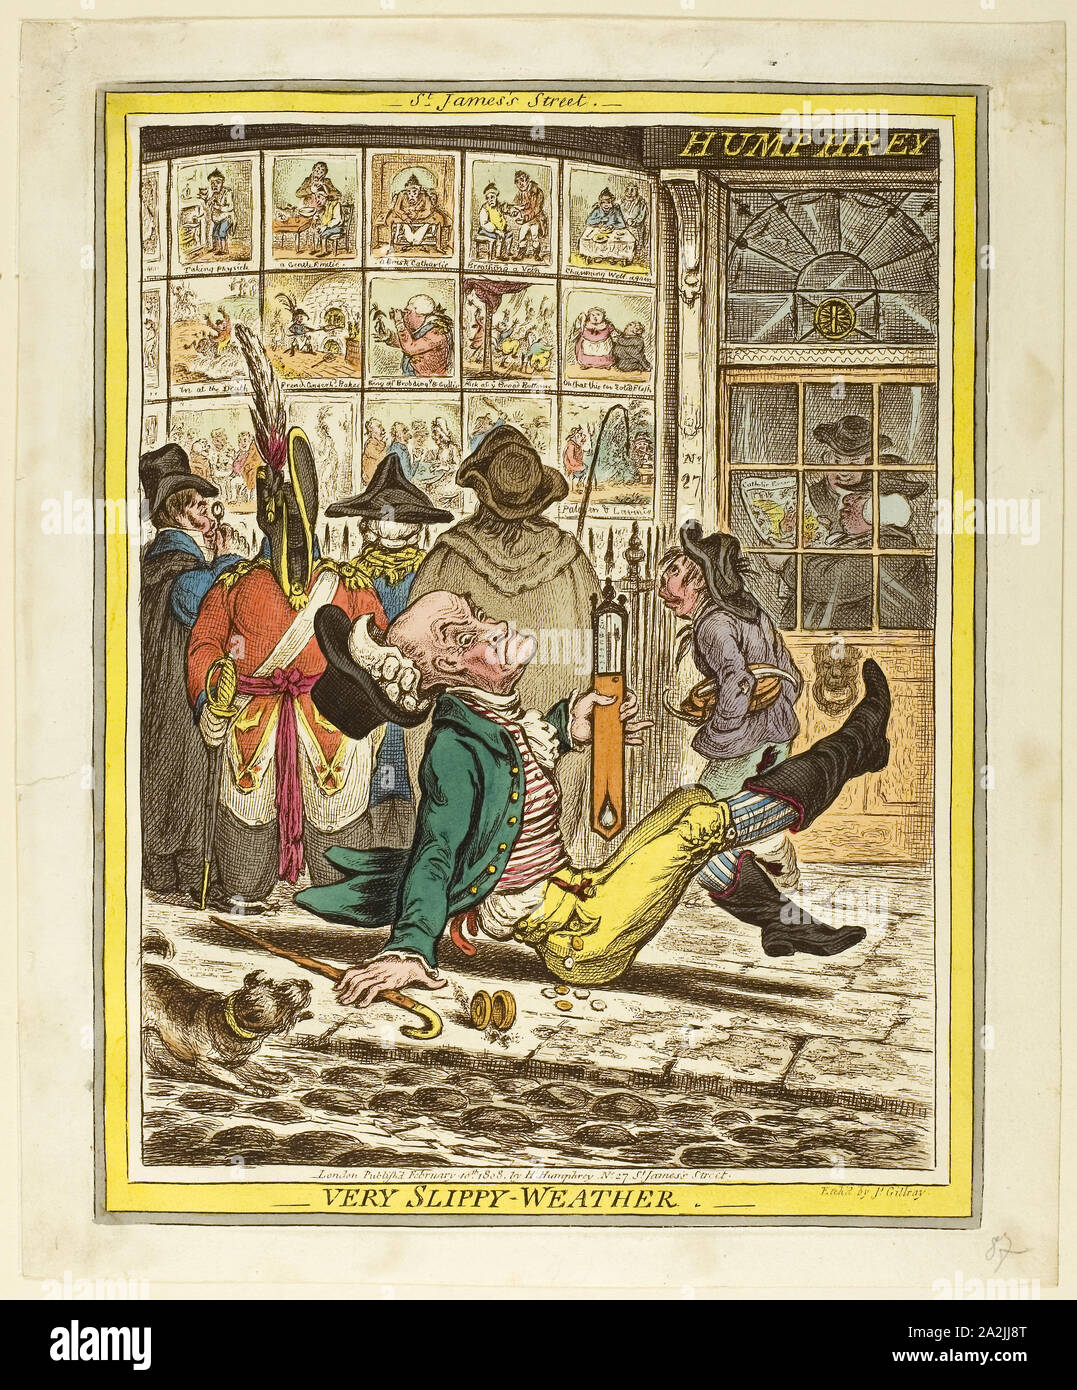 Very Slippery Weather, published February 10, 1808, James Gillray (English, 1756-1815), published by Hannah Humphrey (English, c. 1745-1818), England, Hand-colored etching on paper, 252 × 195 mm (image), 260 × 205 mm (plate), 283 × 235 mm (sheet Stock Photo